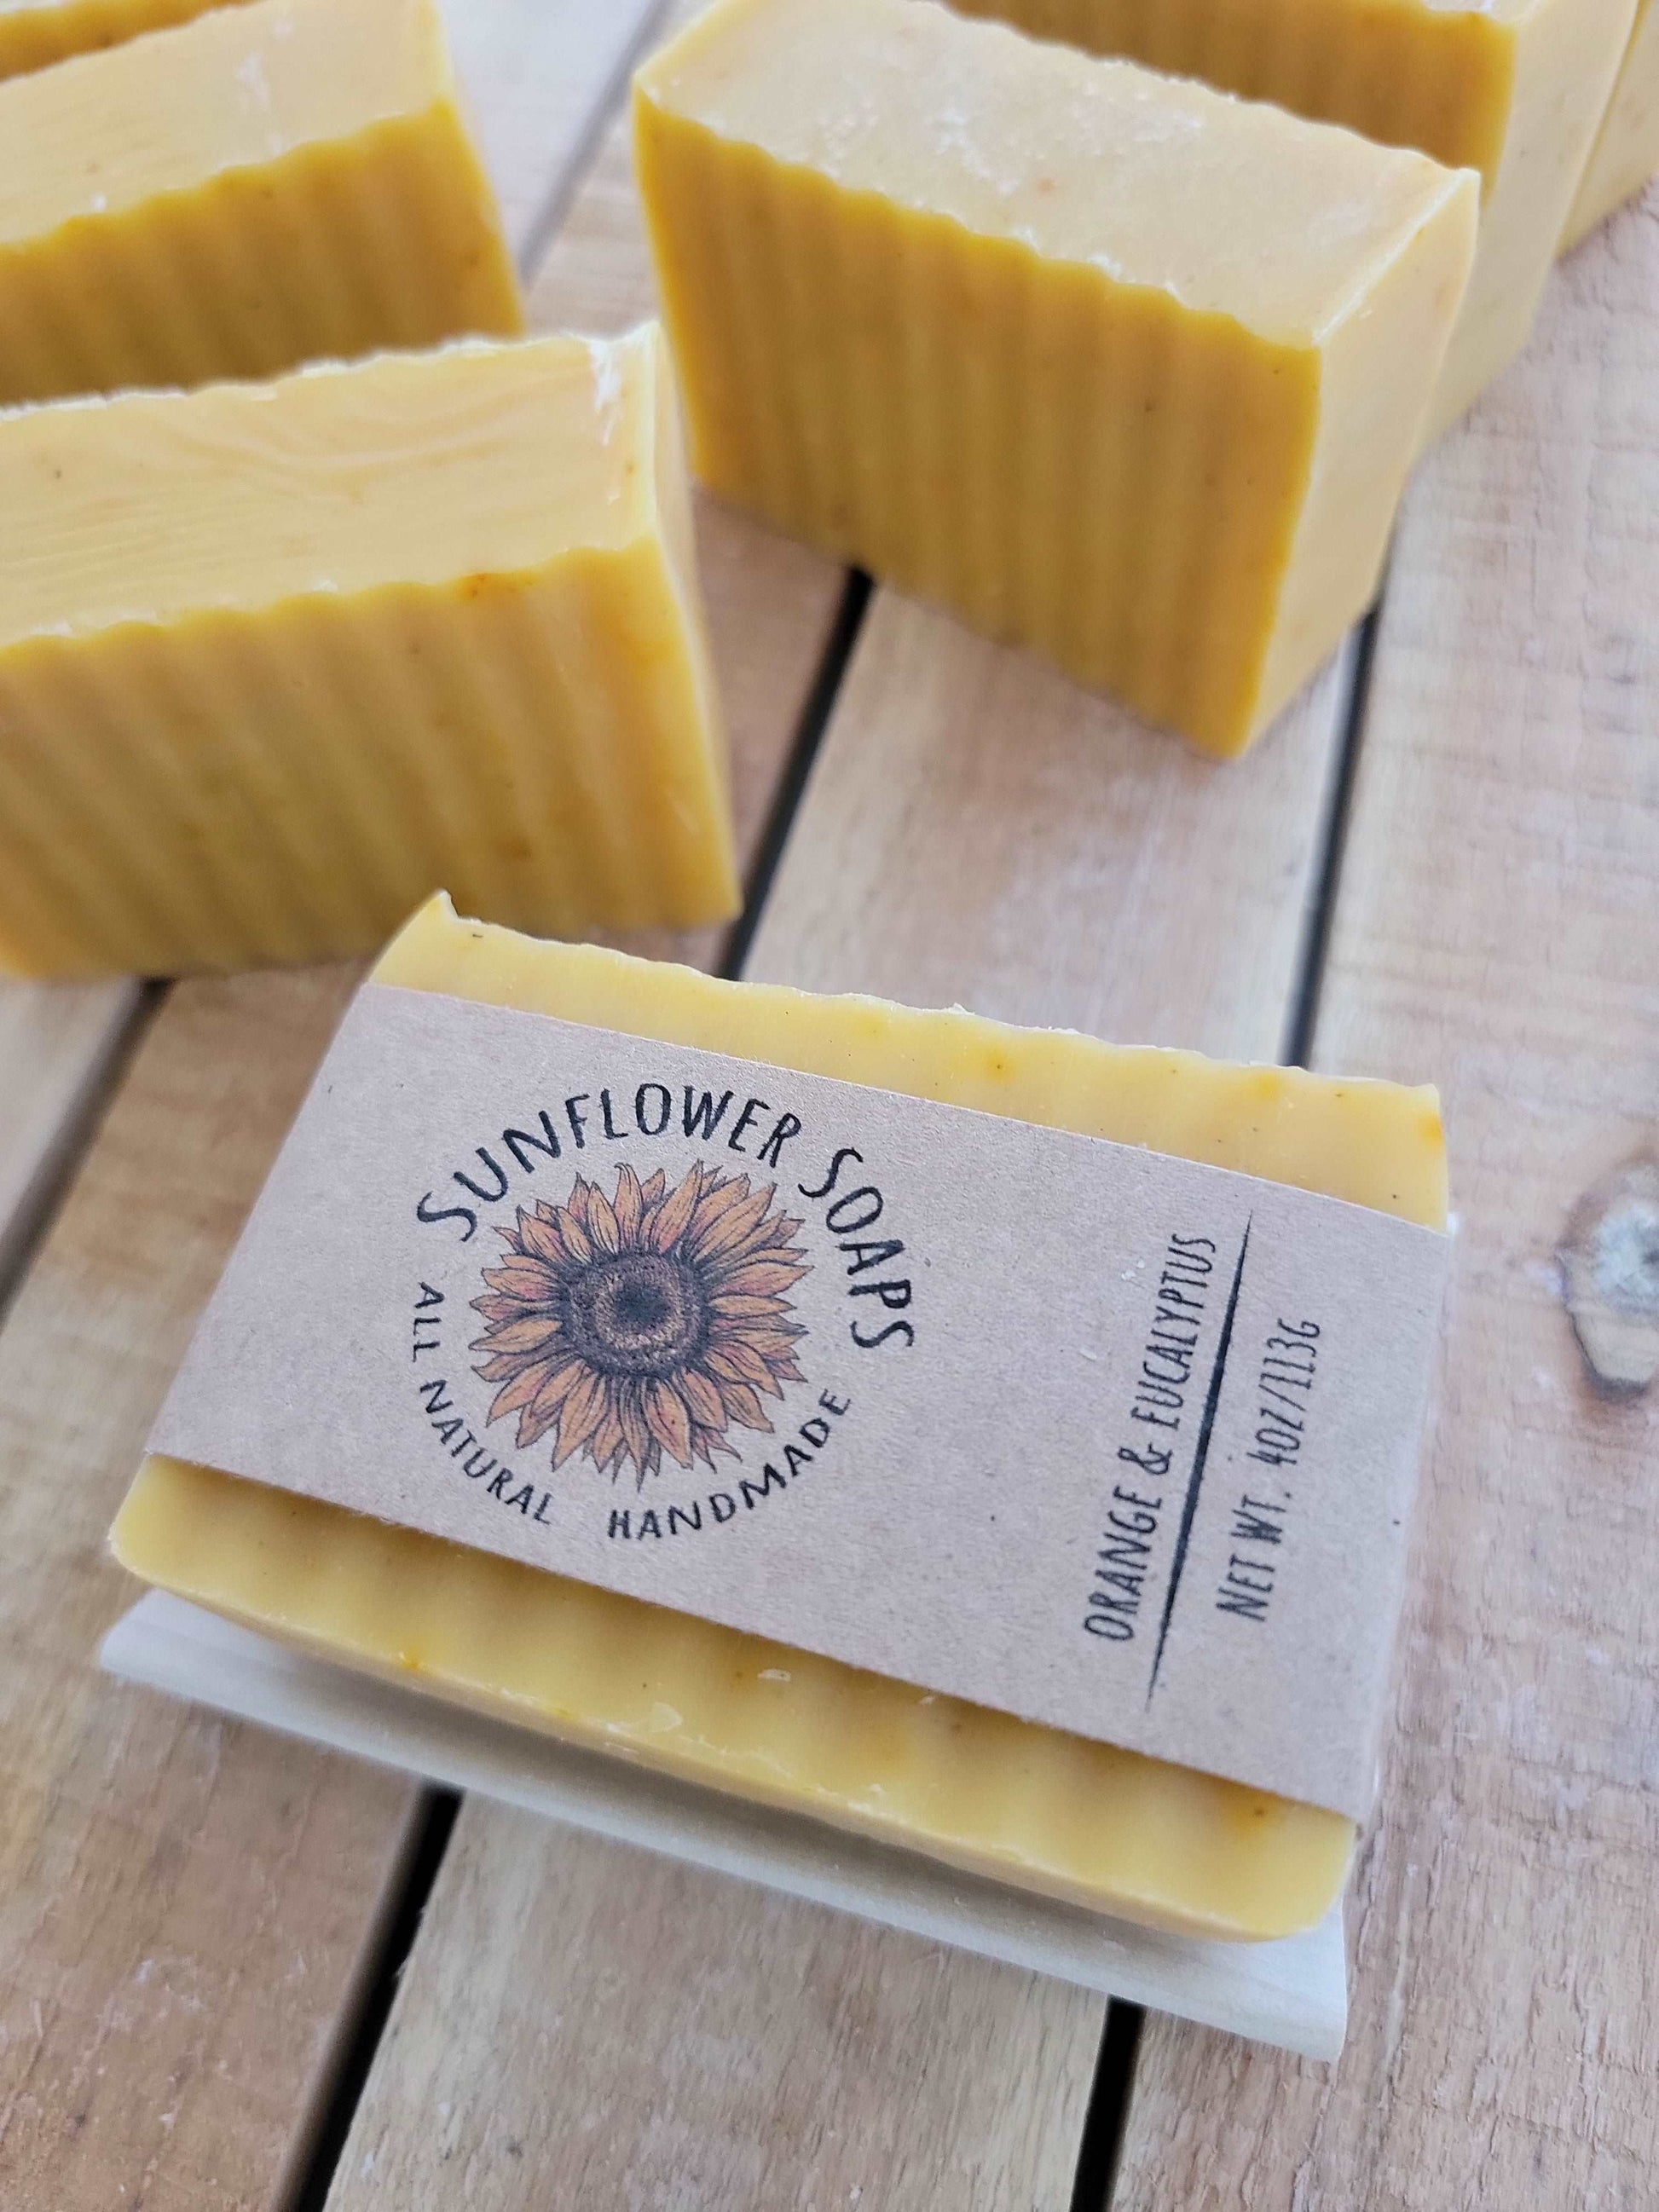 Orange and Eucalyptus with Pumice Soap | Handmade and Natural | Sunflower Soaps